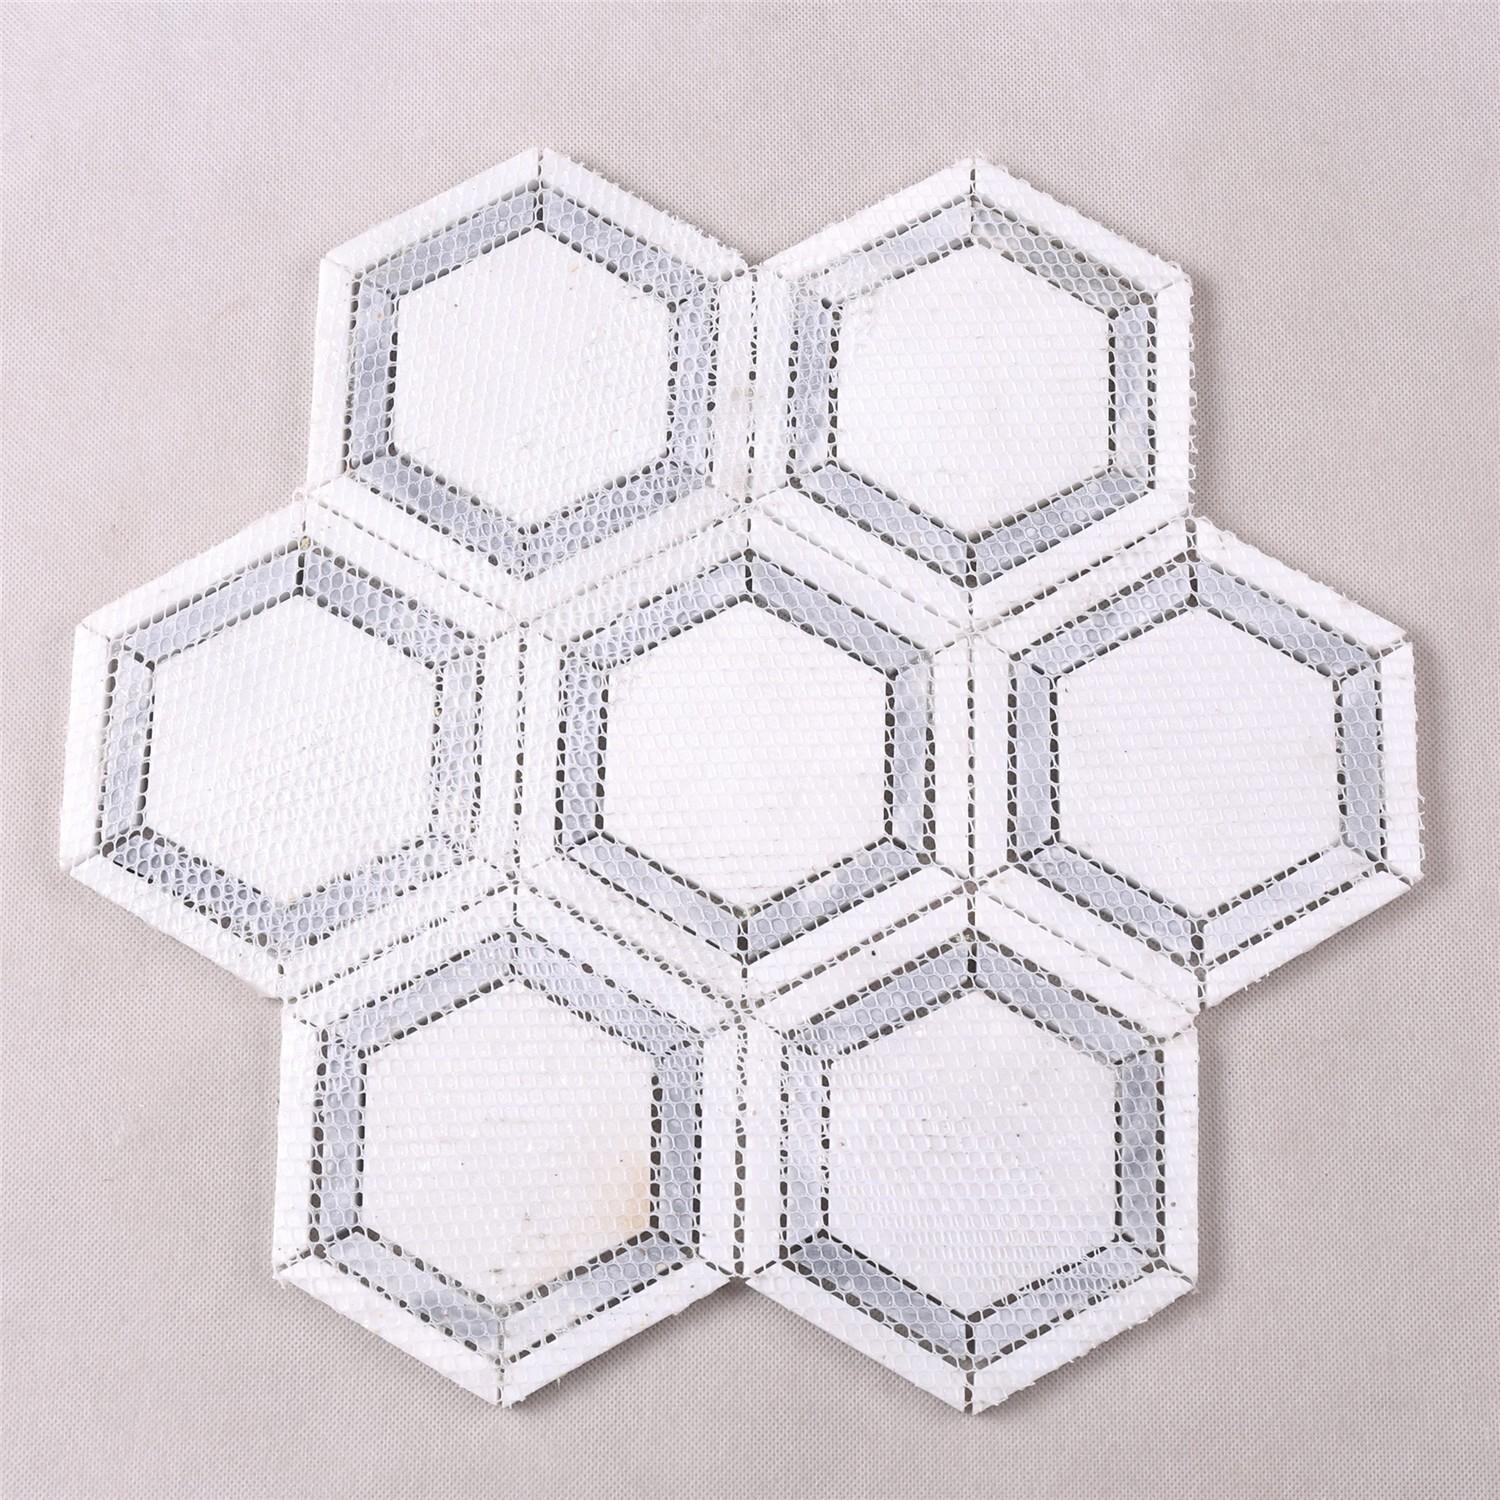 reliable crystal glass mosaic tiles suppliers white series for villa